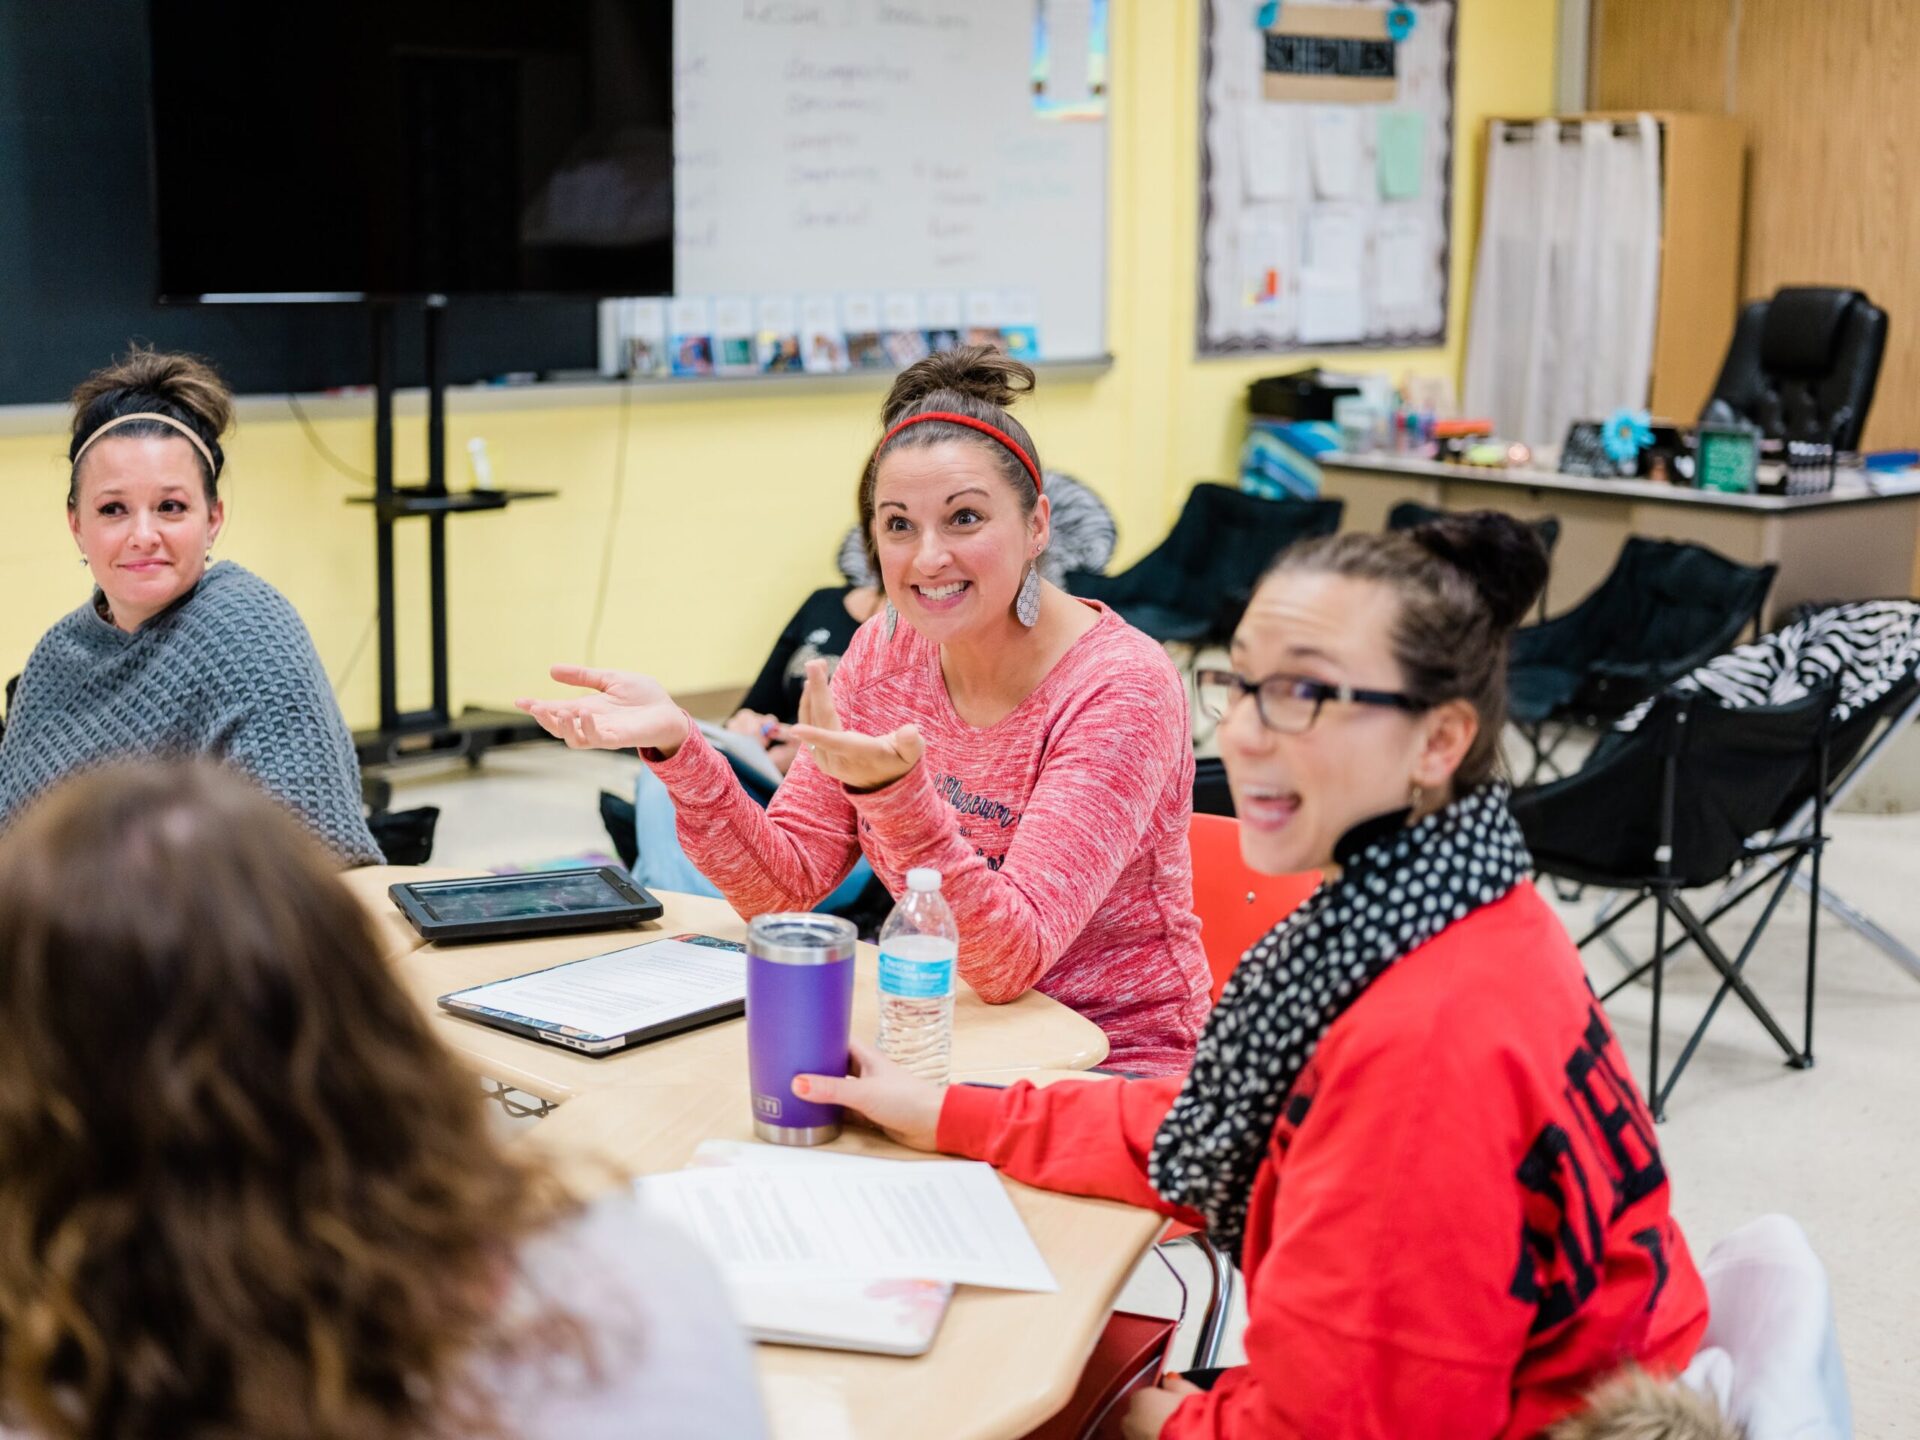 Teachers discusses findings from the PL² observations at Elizabeth Forward. / Photo by Ben Filio